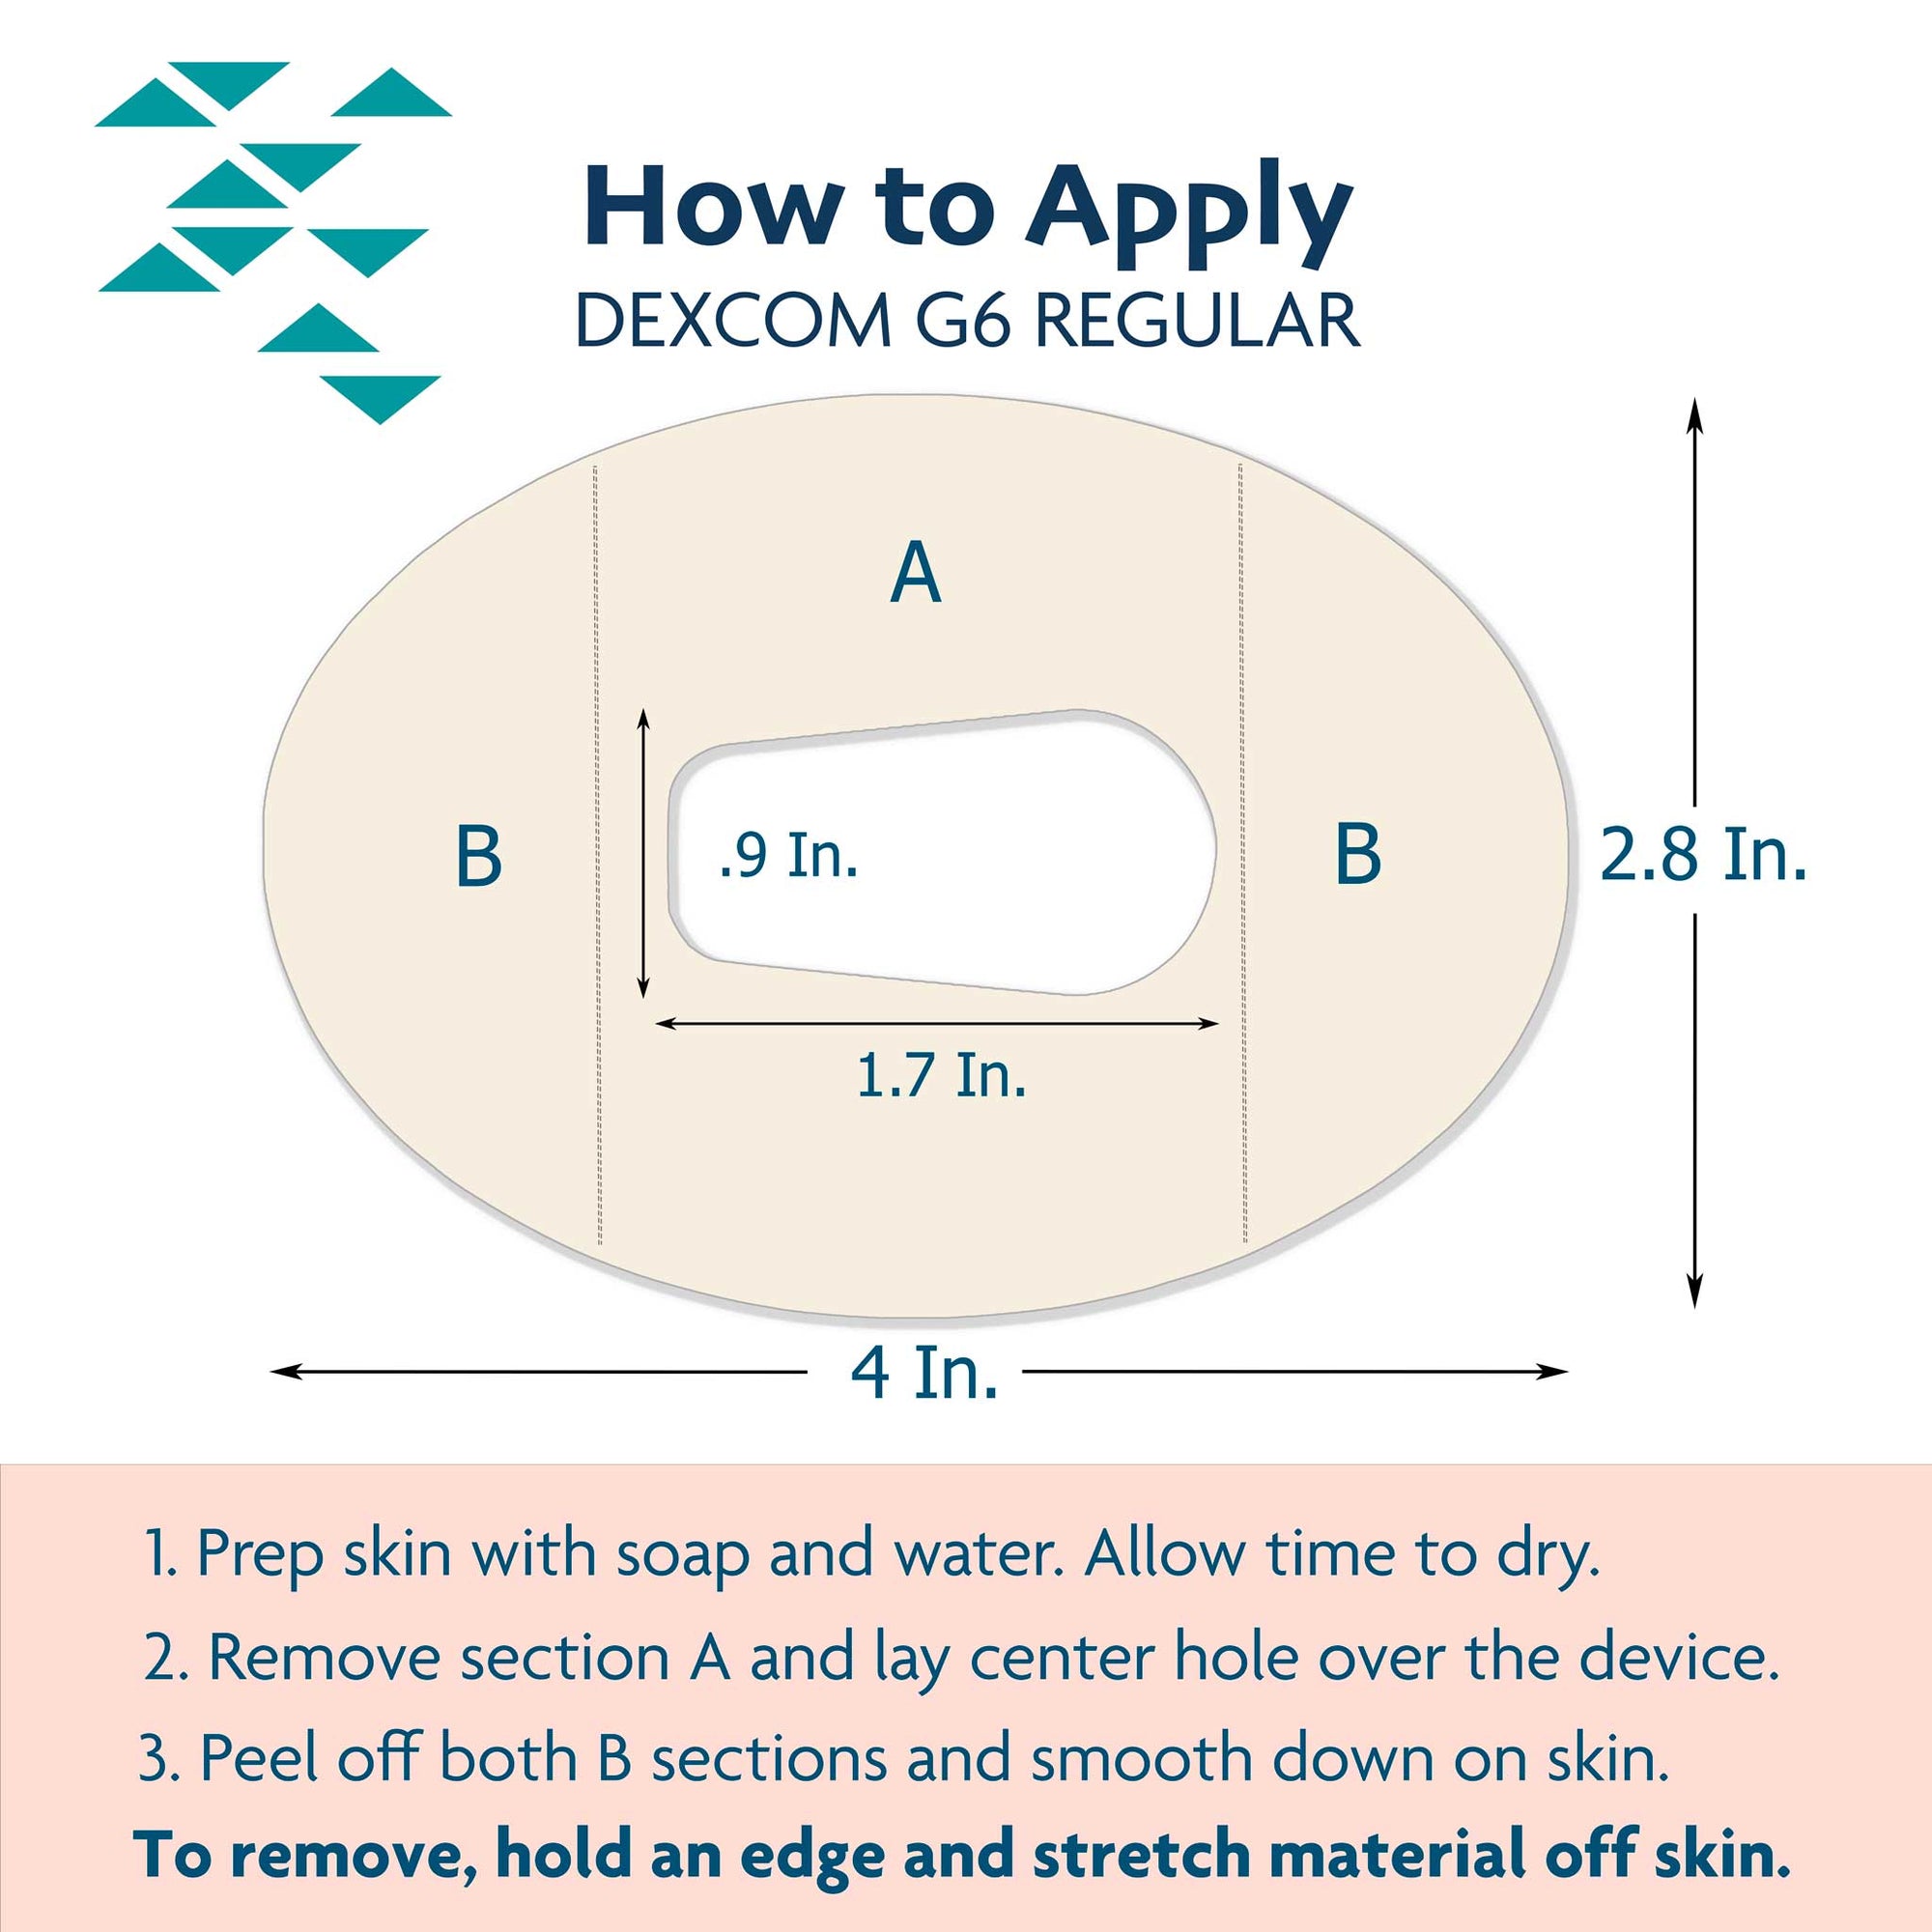 ExpressionMed How to Apply Dexcom G6 CGM Covers